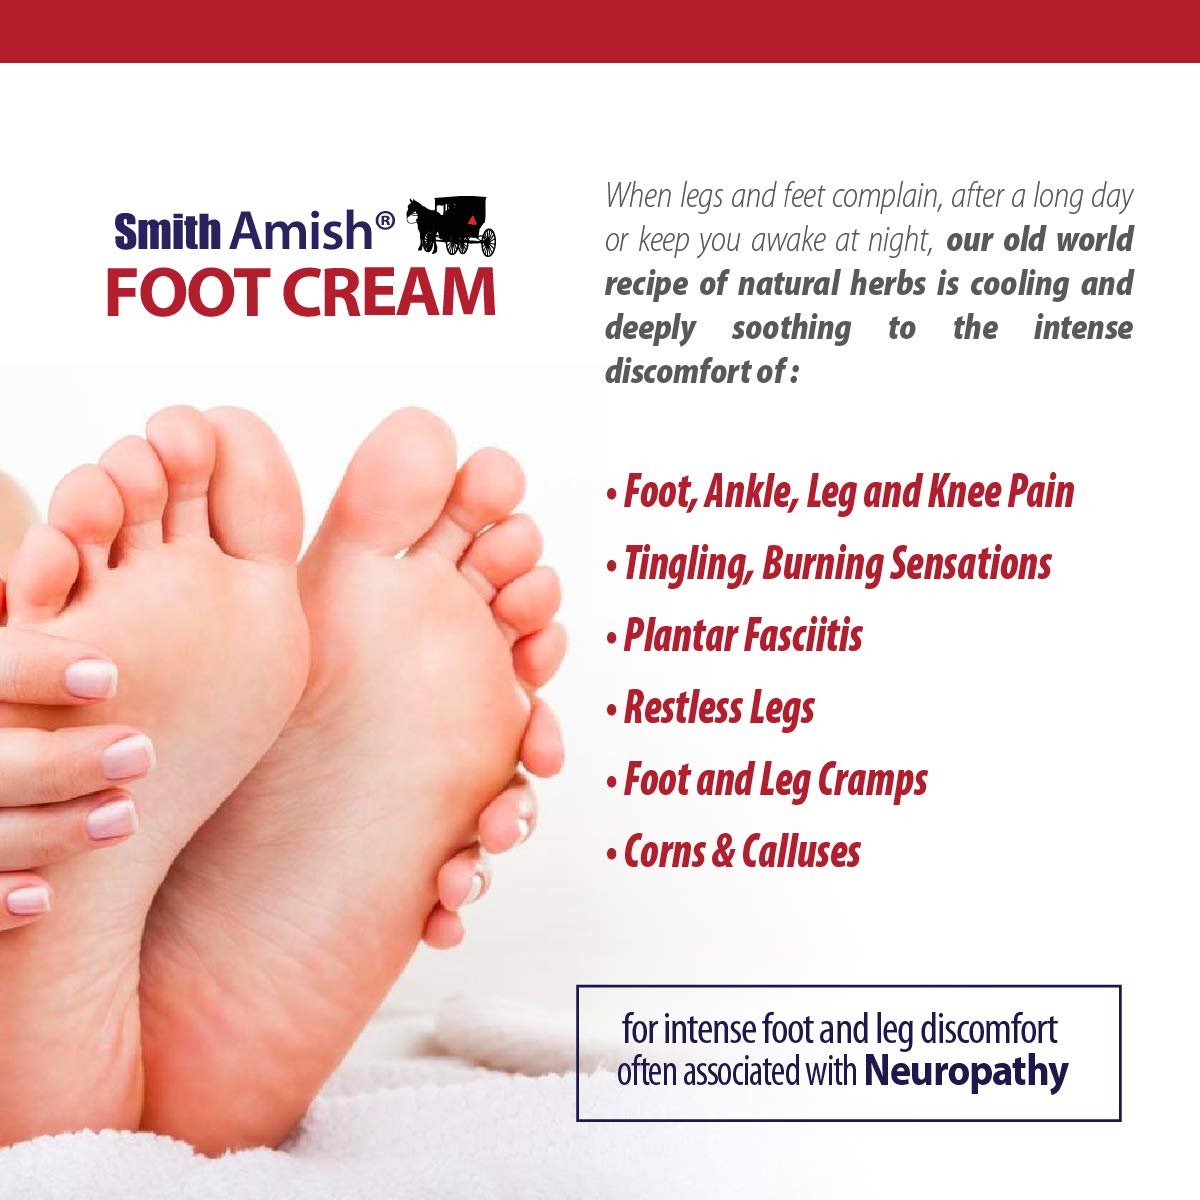 Smith Amish Foot Cream, Deep Soothing and Calming to Foot and Legs. 4.5 oz